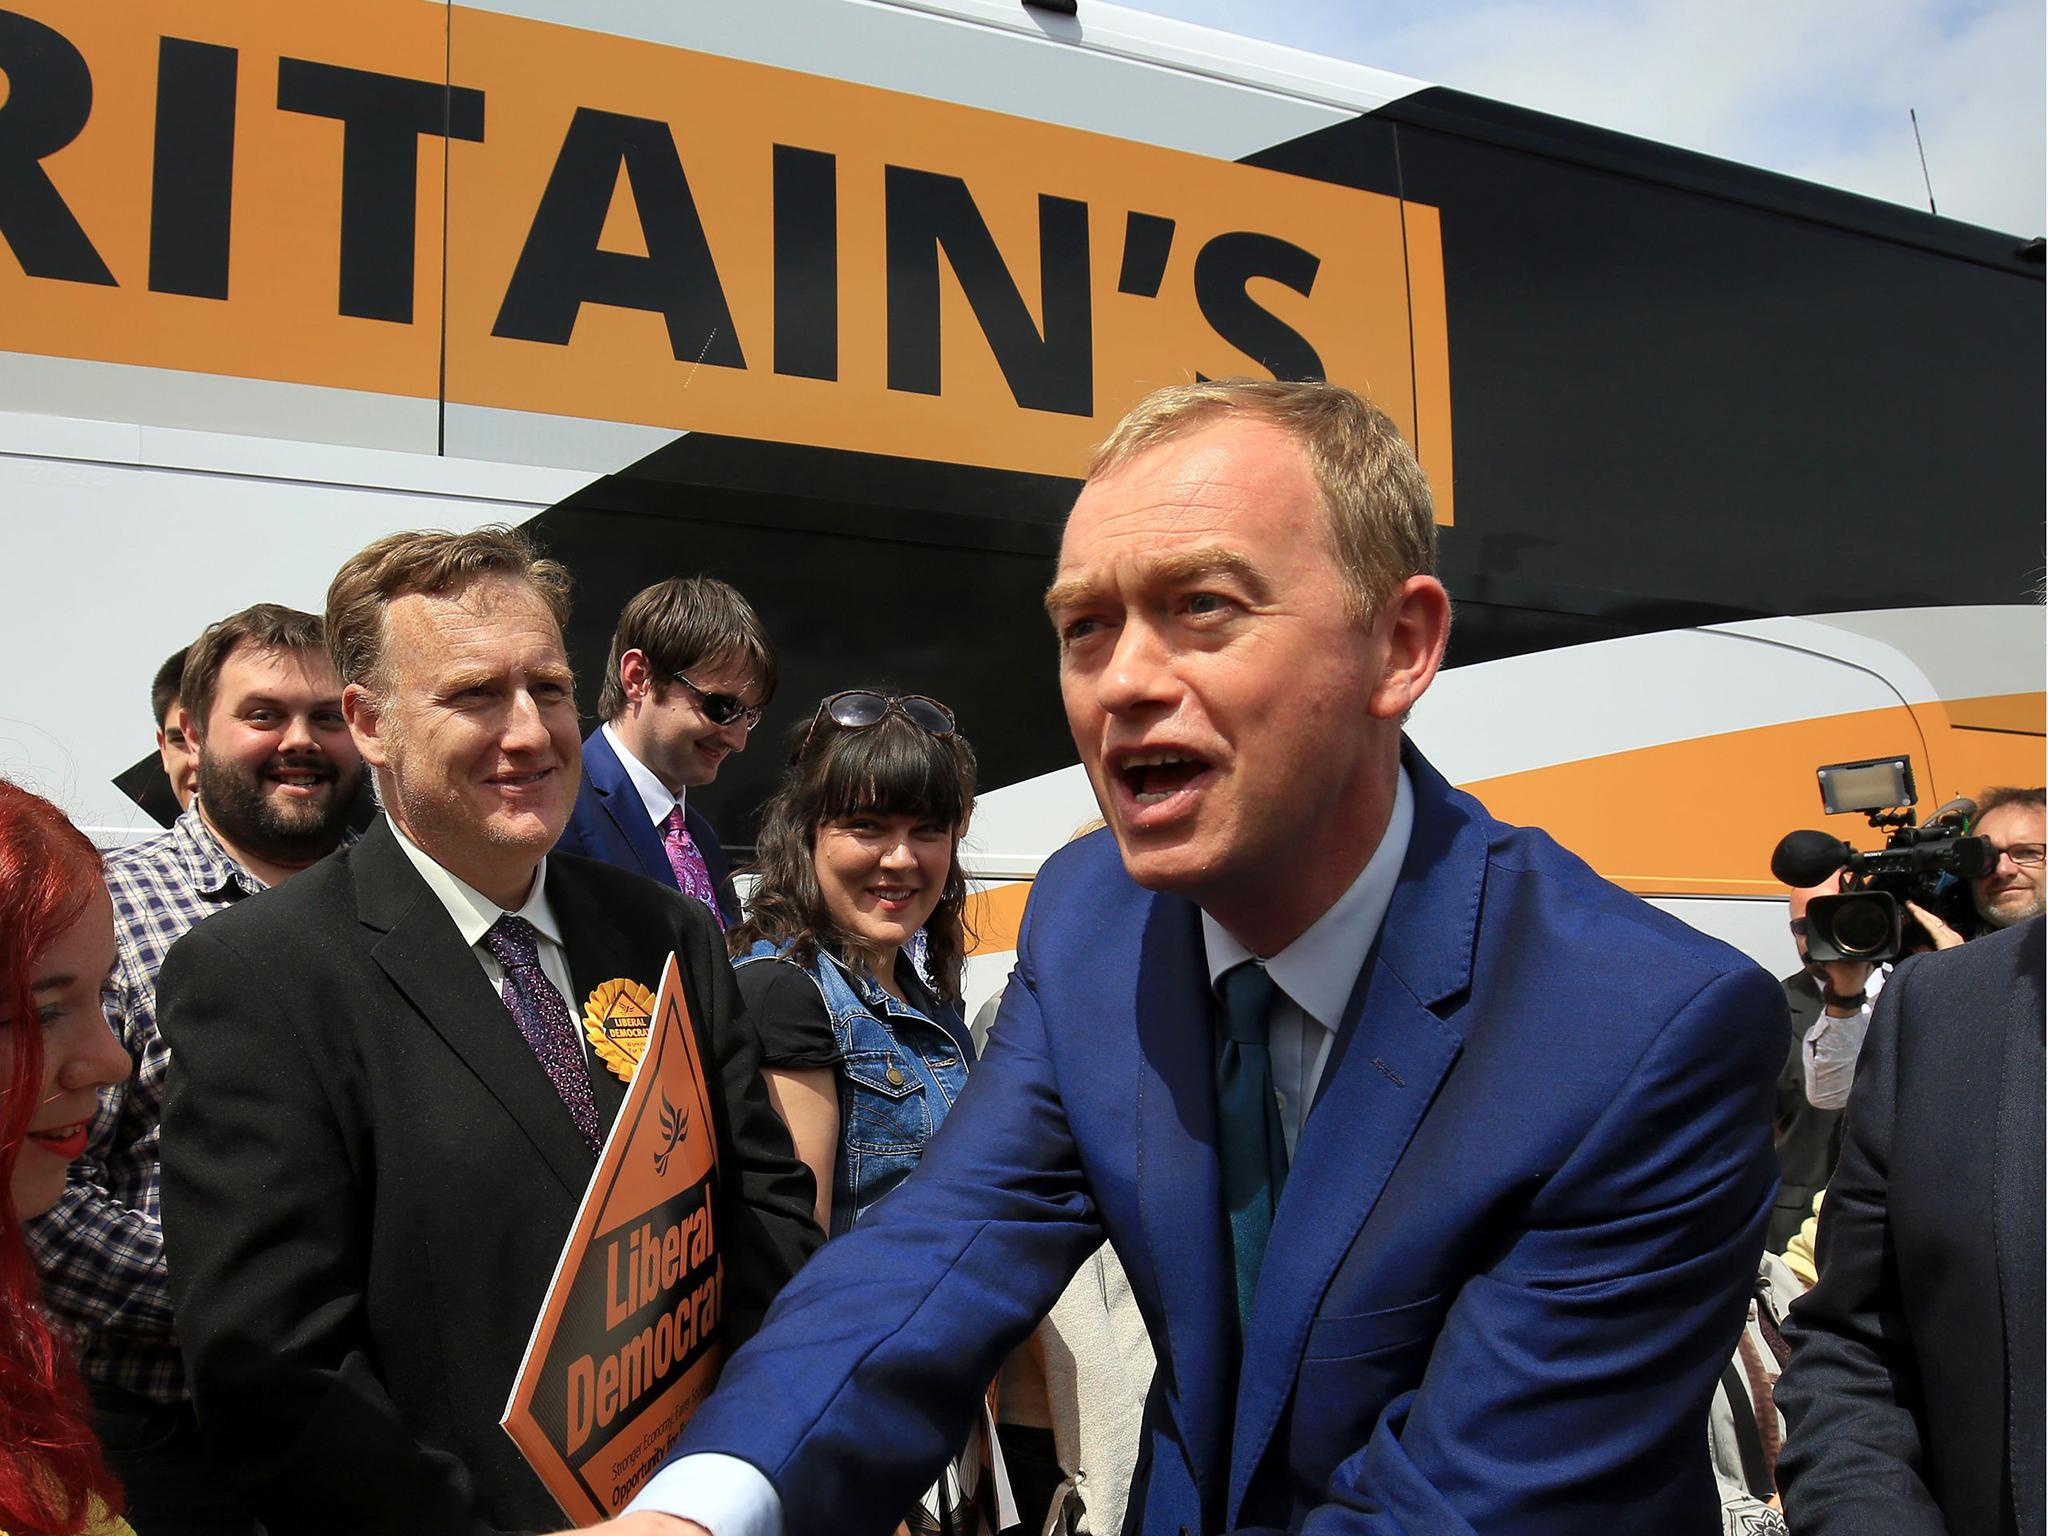 Liberal Democrats leader Tim Farron greets supporters during a General Election campaign visit to Portsmouth